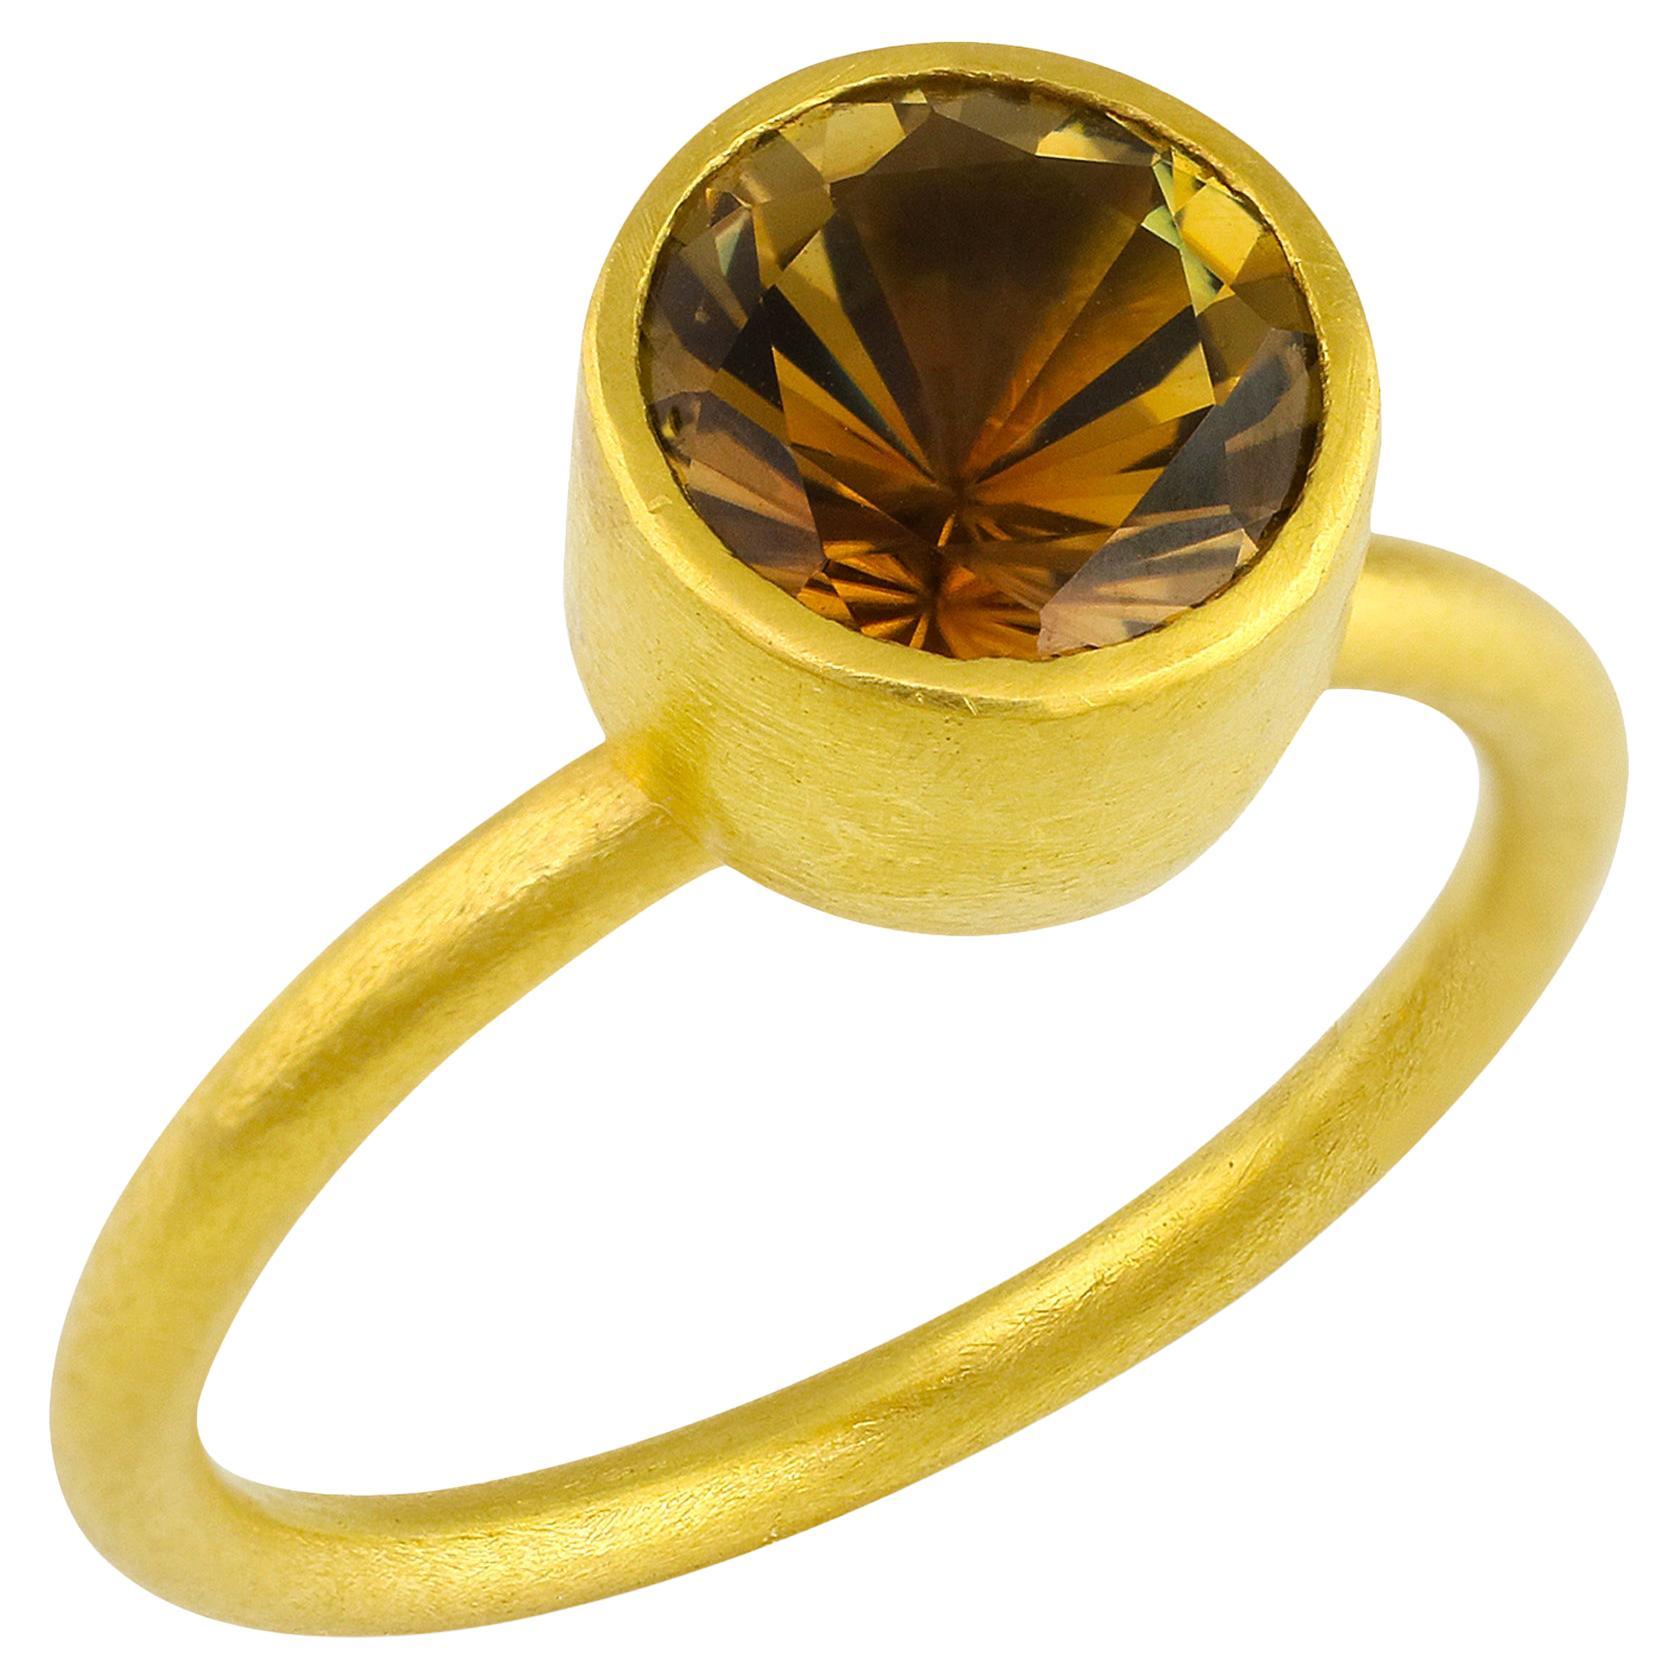 PHILIPPE SPENCER 1.85 Ct. Tourmaline in 22K and 20K Gold Solitaire Ring For Sale